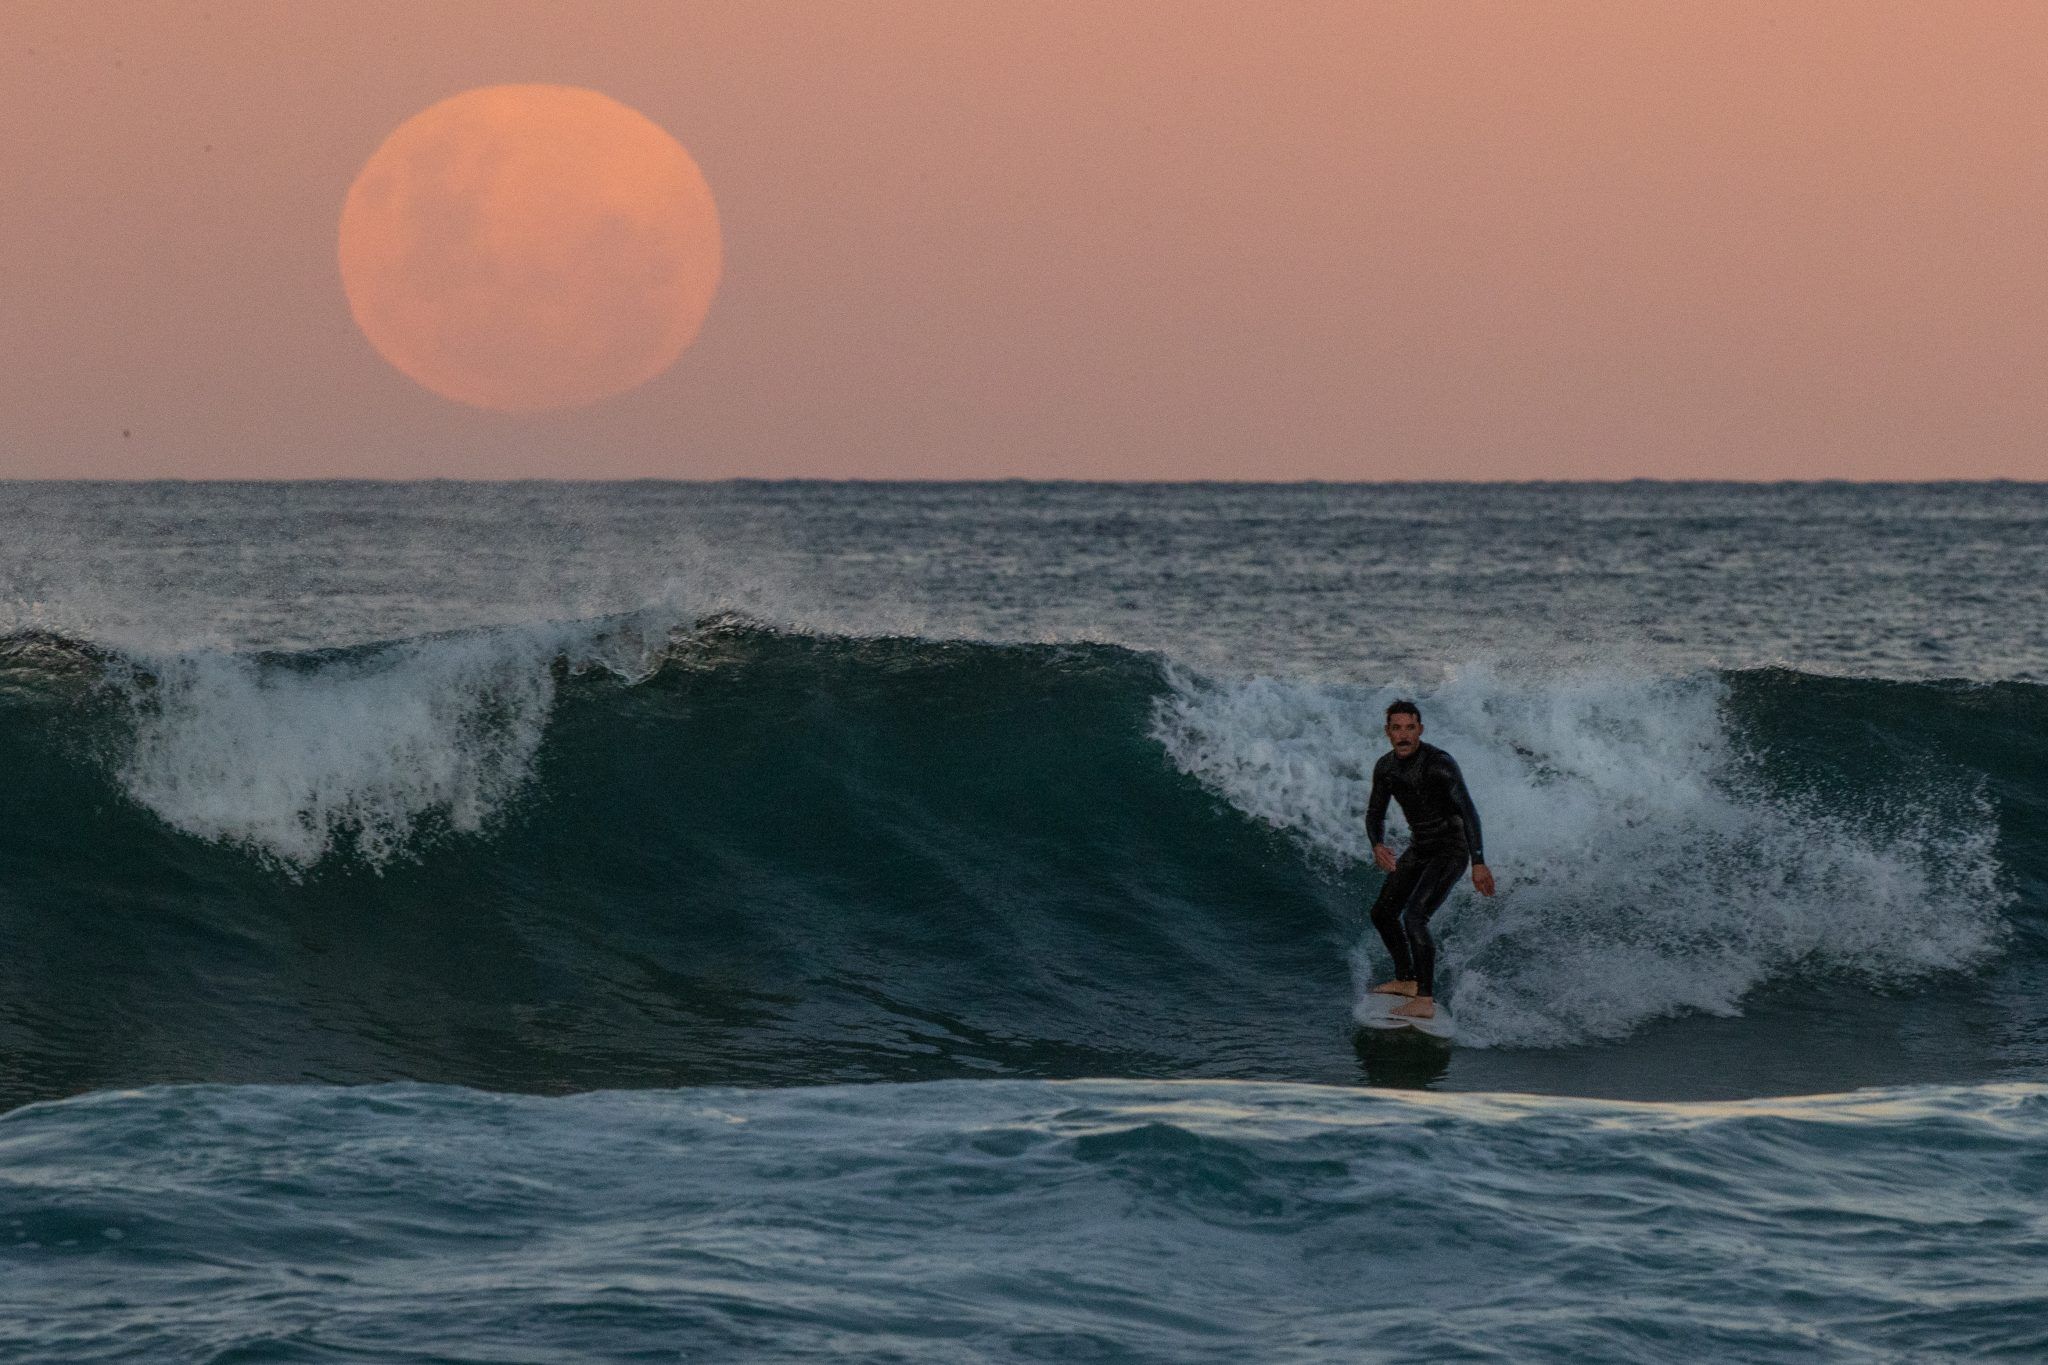 SYDNEY, AUSTRALIA - MAY 26: A surfer rides a wave as a super blood moon rises above the horizon at Manly Beach on May 26, 2021 in Sydney, Australia. It is the first total lunar eclipse in more than two years, which coincides with a supermoon. A super moon is a name given to a full (or new) moon that occurs when the moon is in perigee - or closest to the earth - and it is the moon's proximity to earth that results in its brighter and bigger appearance. (Photo by Cameron Spencer/Getty Images)